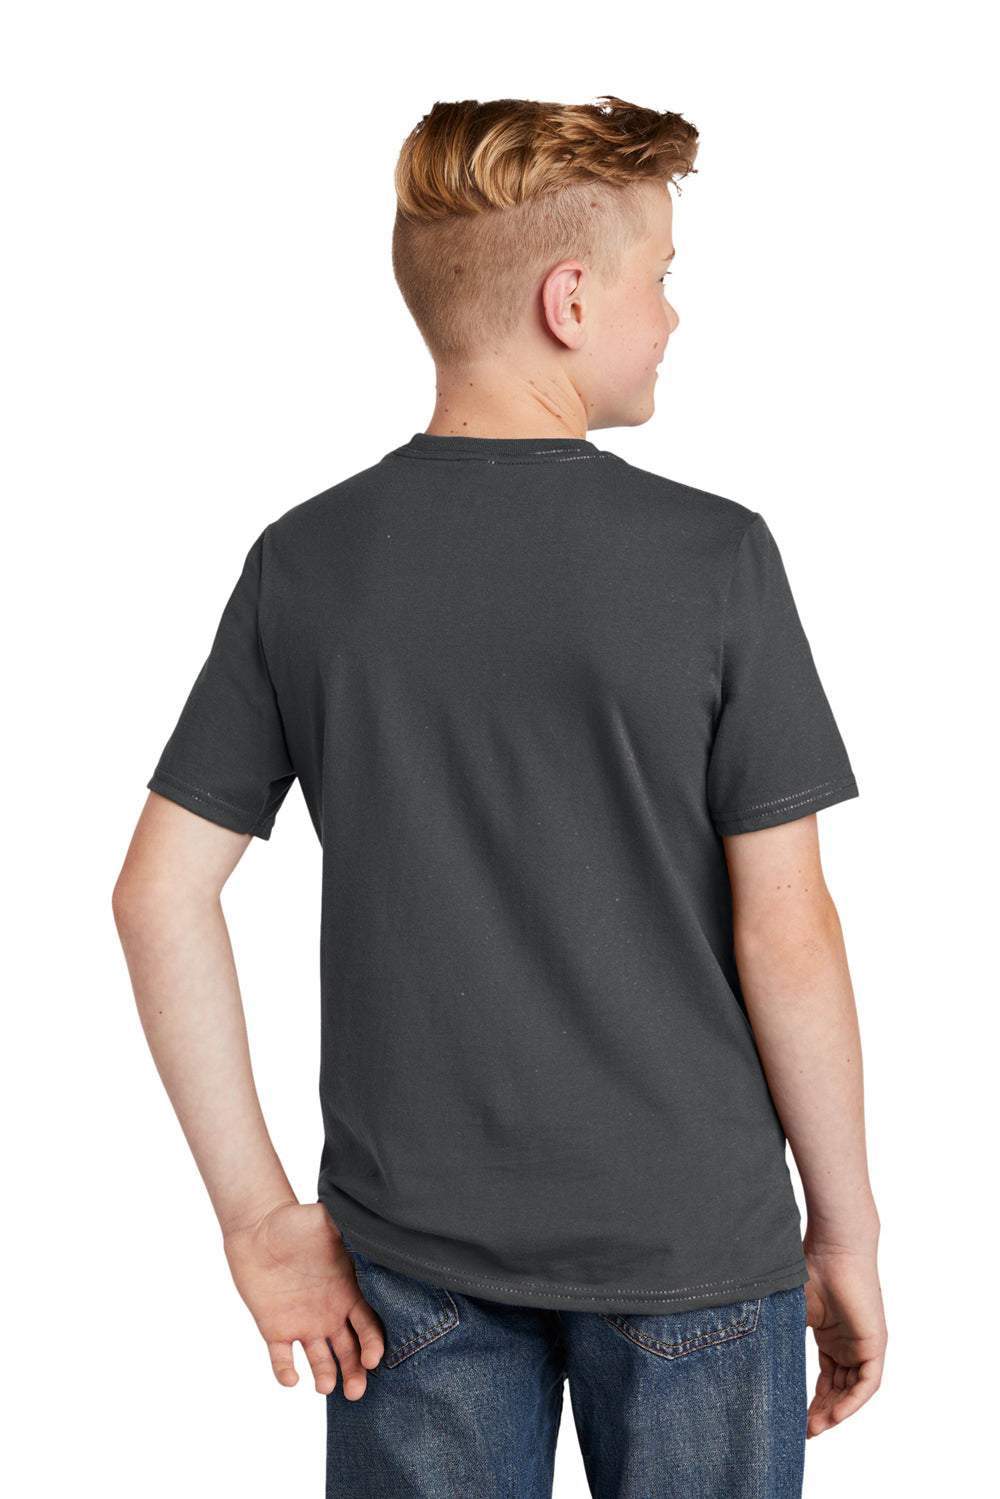 District DT6000Y Youth Very Important Short Sleeve Crewneck T-Shirt Charcoal Grey Back